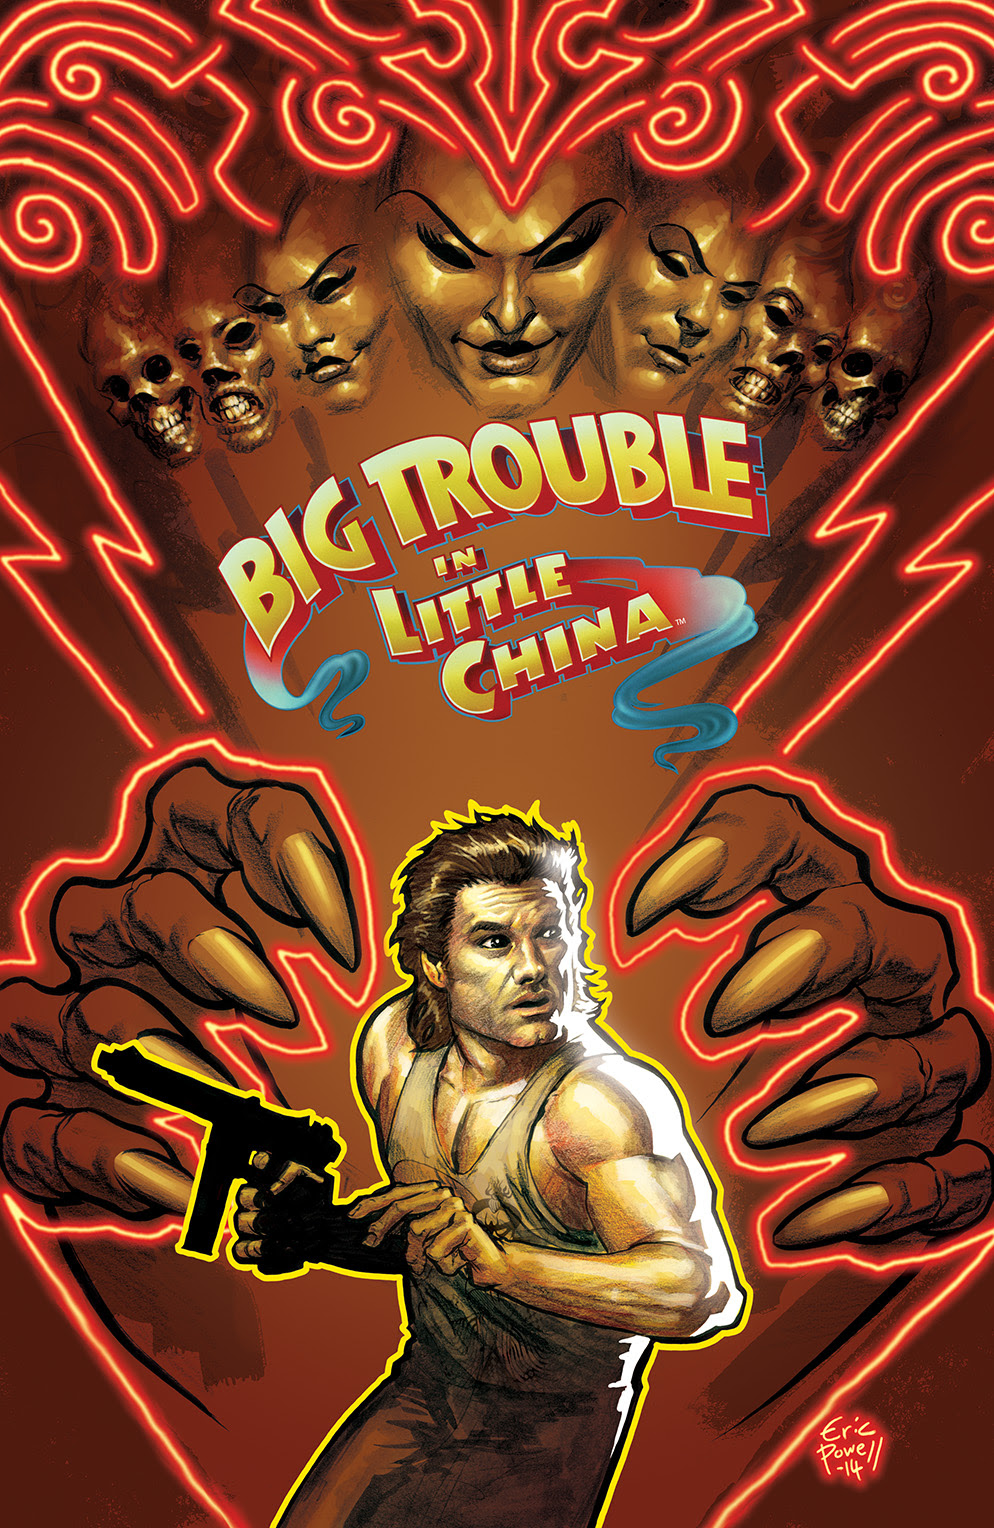 BIG TROUBLE IN LITTLE CHINA #3 Cover A by Eric Powell